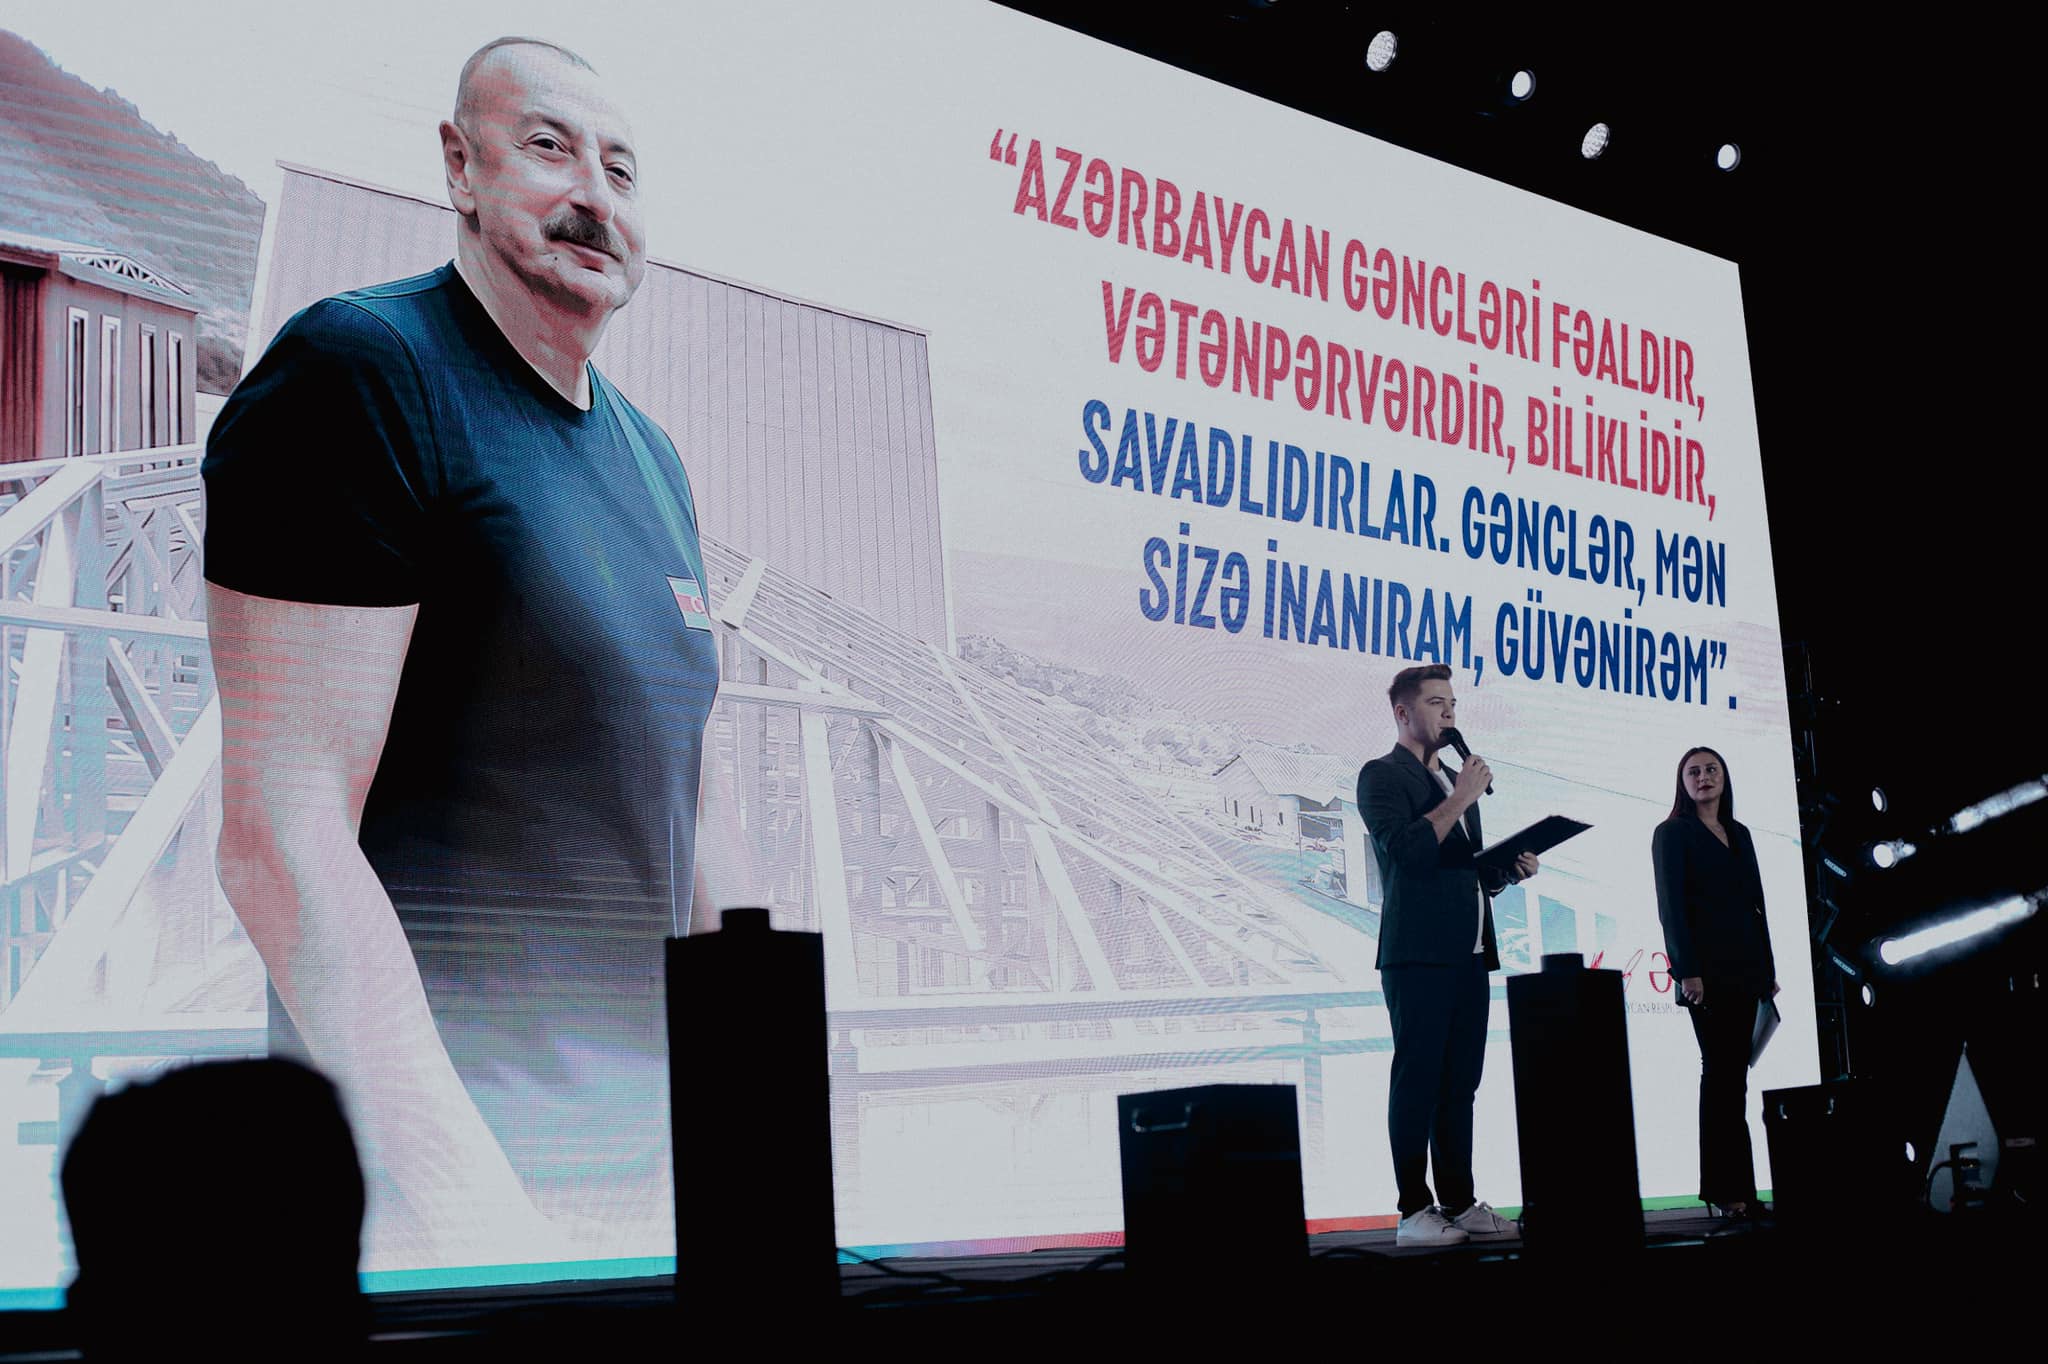 Organized by the National Council of Youth Organizations of the Republic of Azerbaijan (NAYORA) and with the support of leading student and volunteer organizations of the country, the grandest youth event of the year - "Youth Solidarity Festival" - was held in the Baku Crystal Hall.